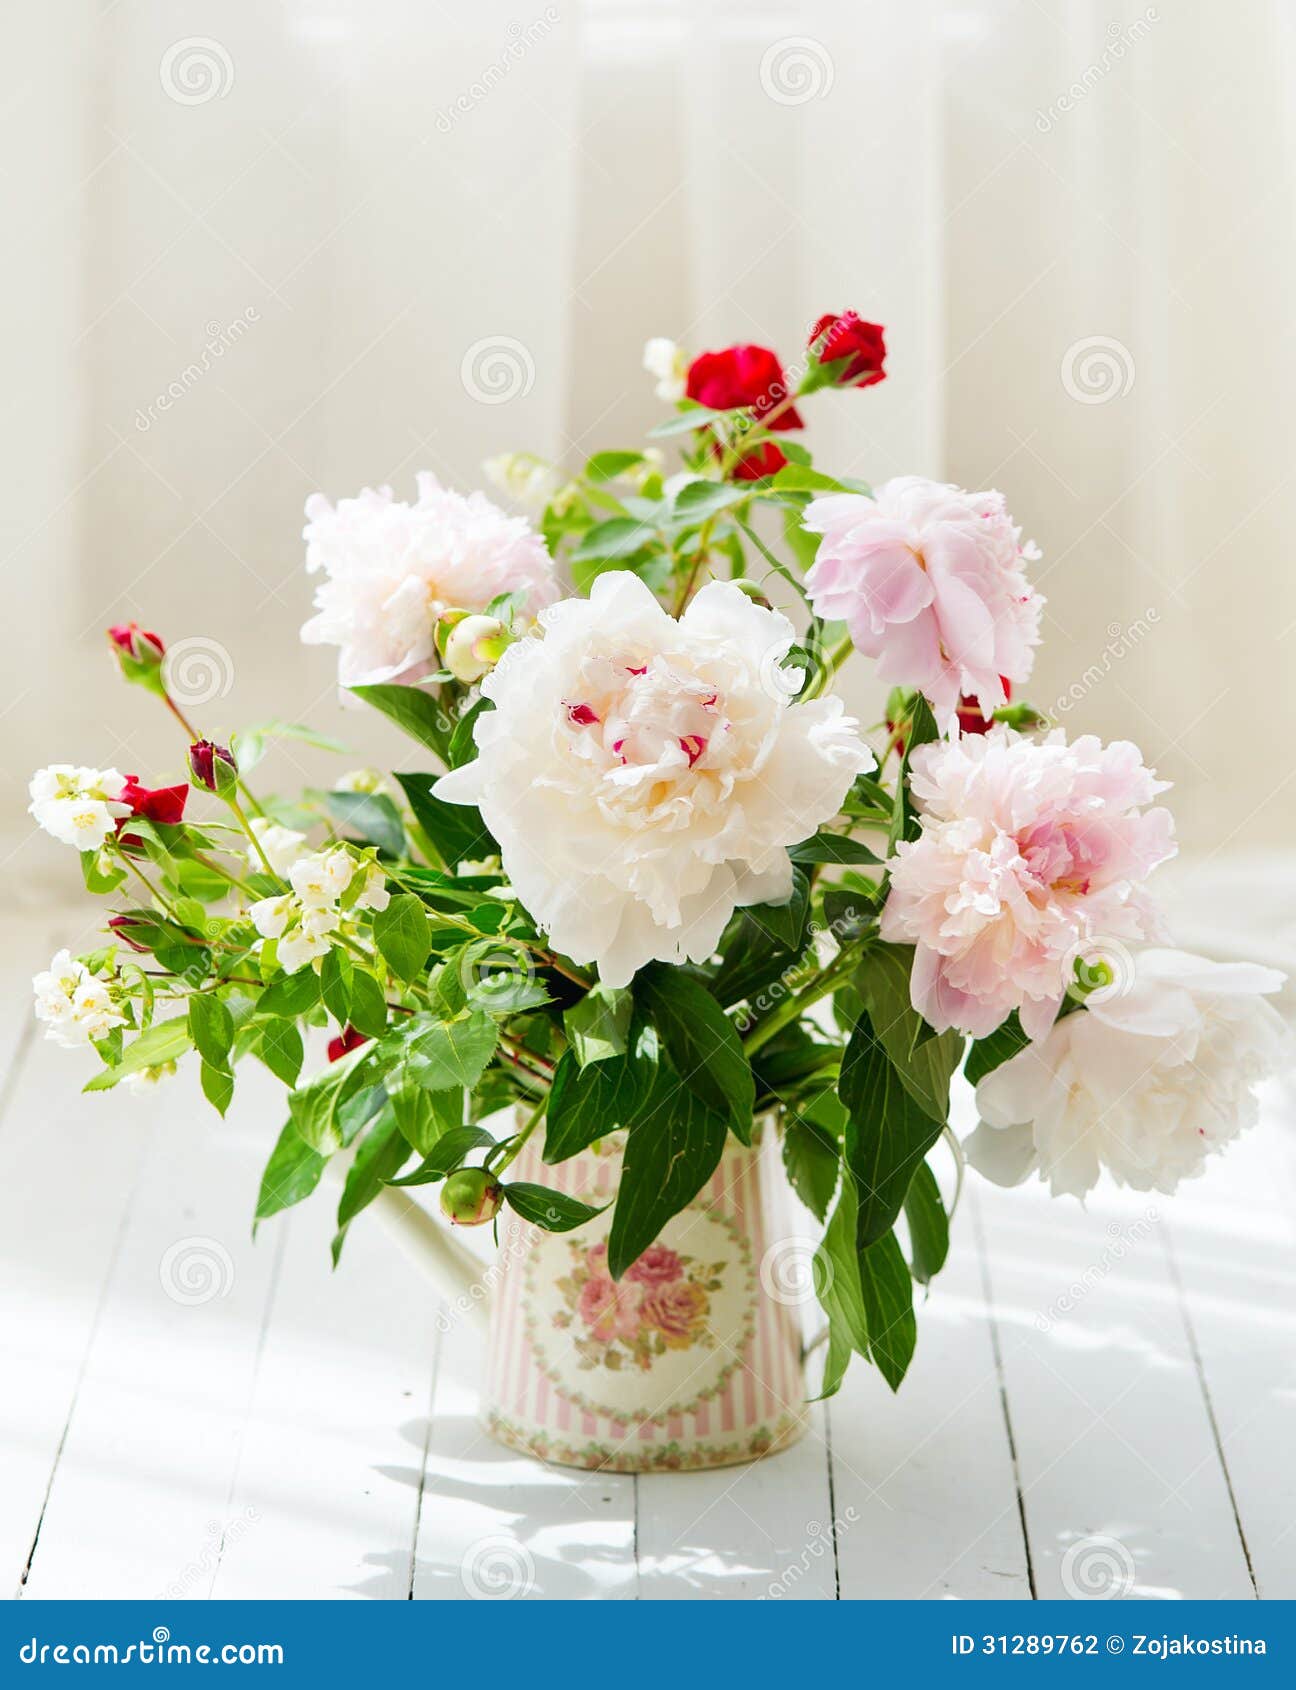 Delicate Peonies in a Water Can Stock Photo - Image of nature, natural ...